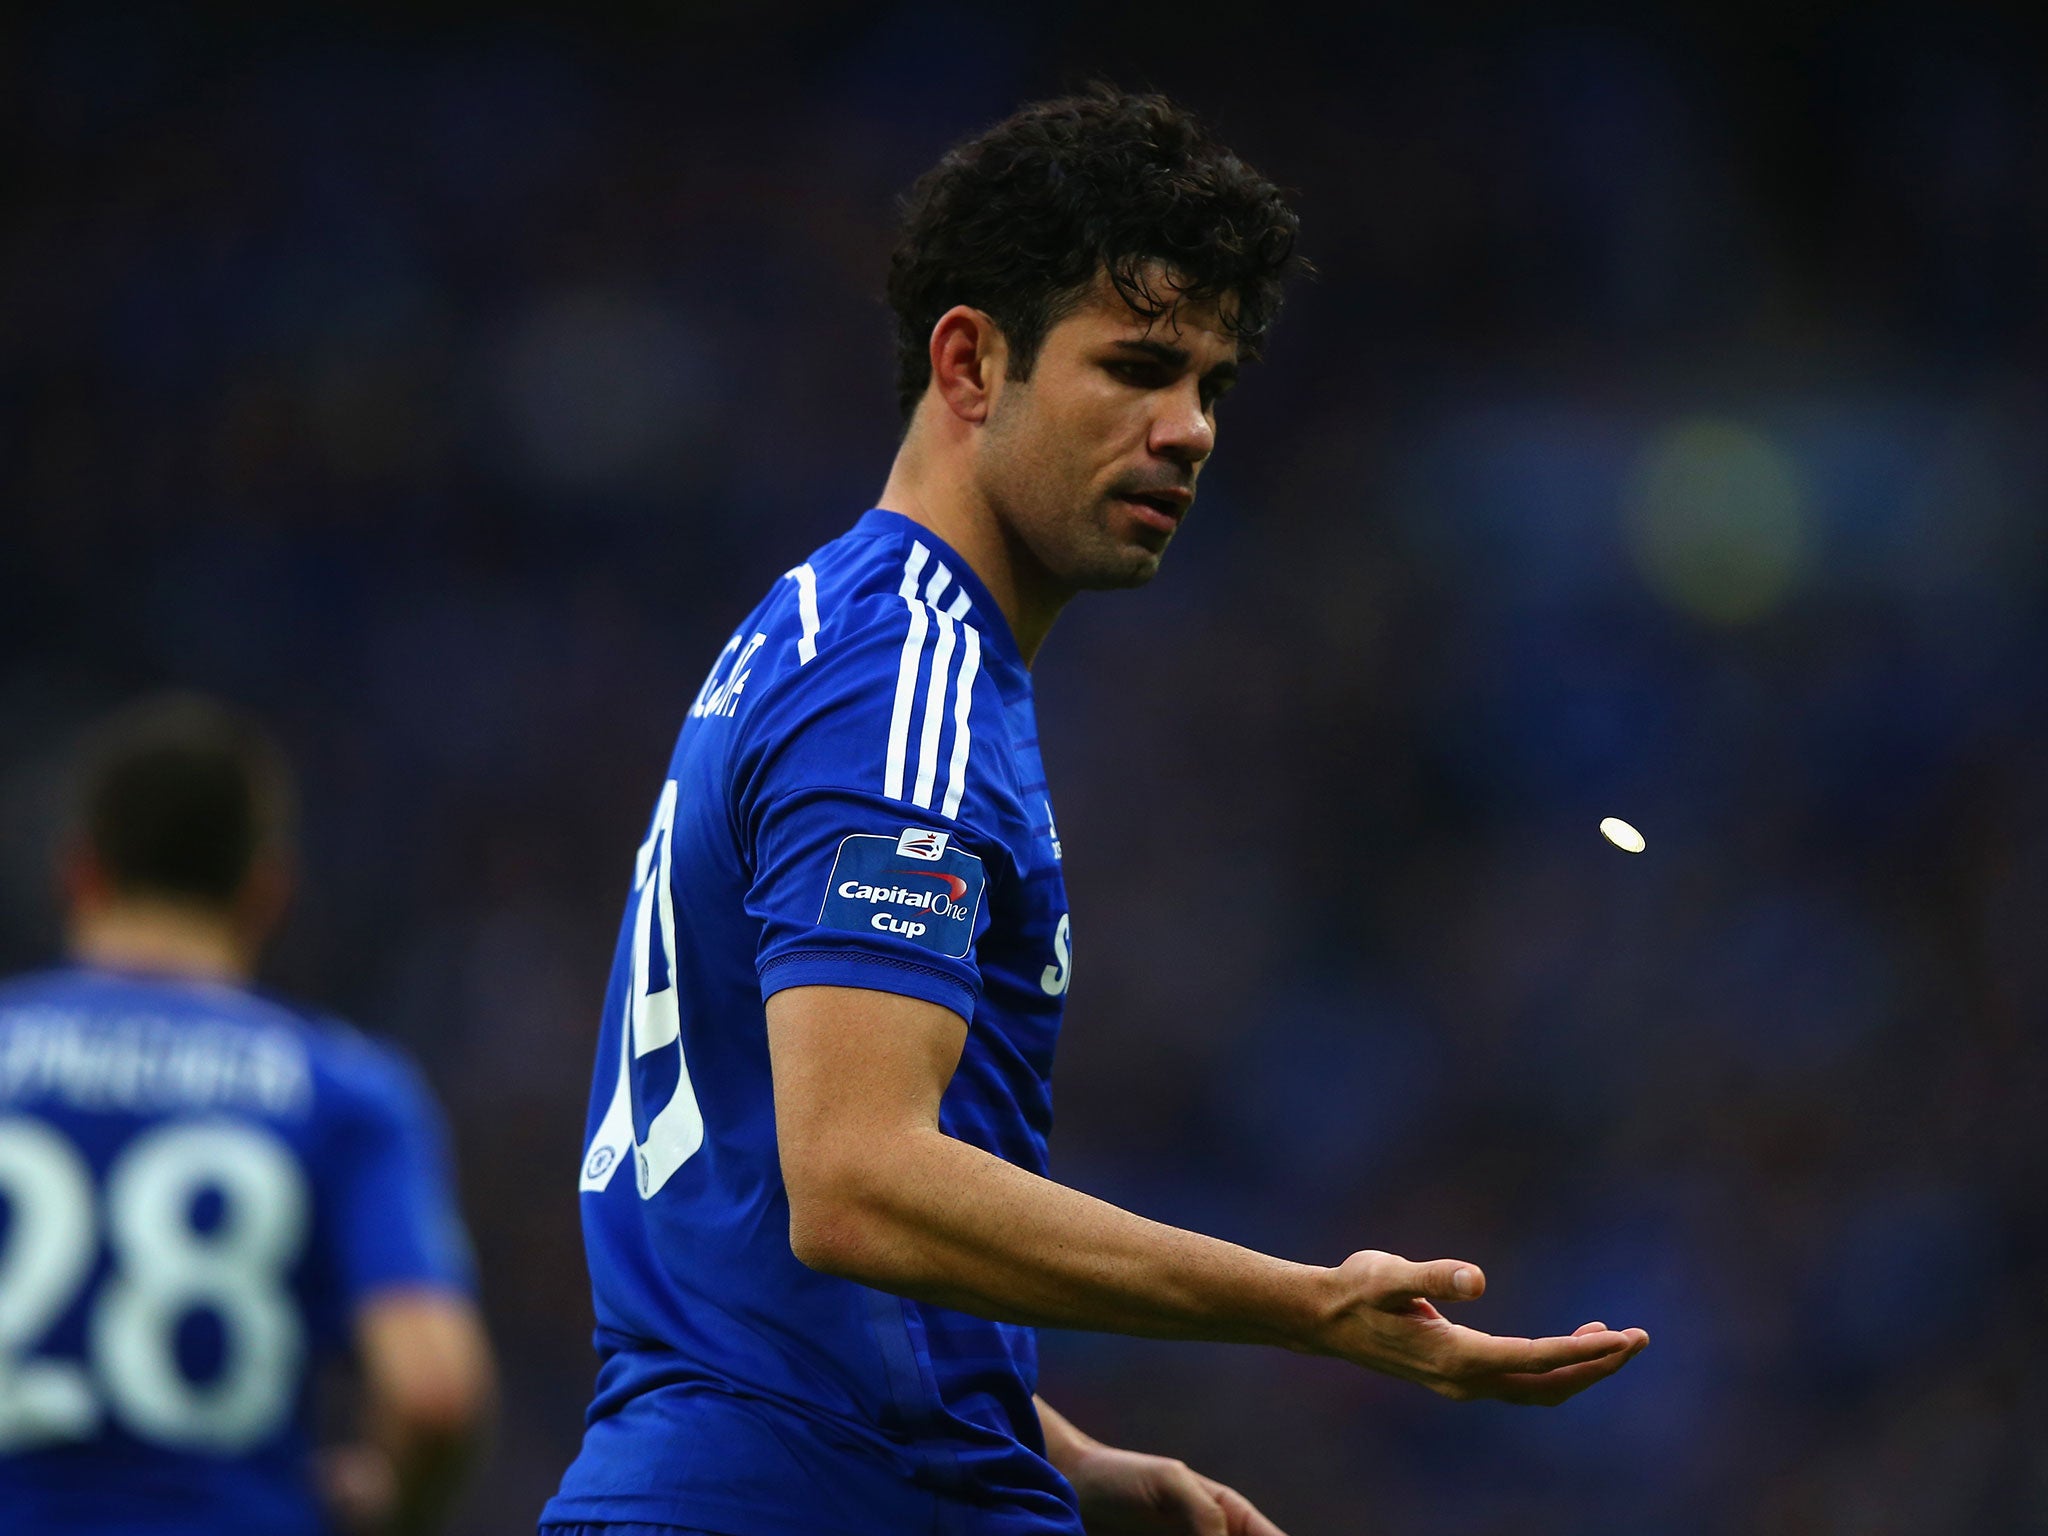 Diego Costa throws the coin up in the air